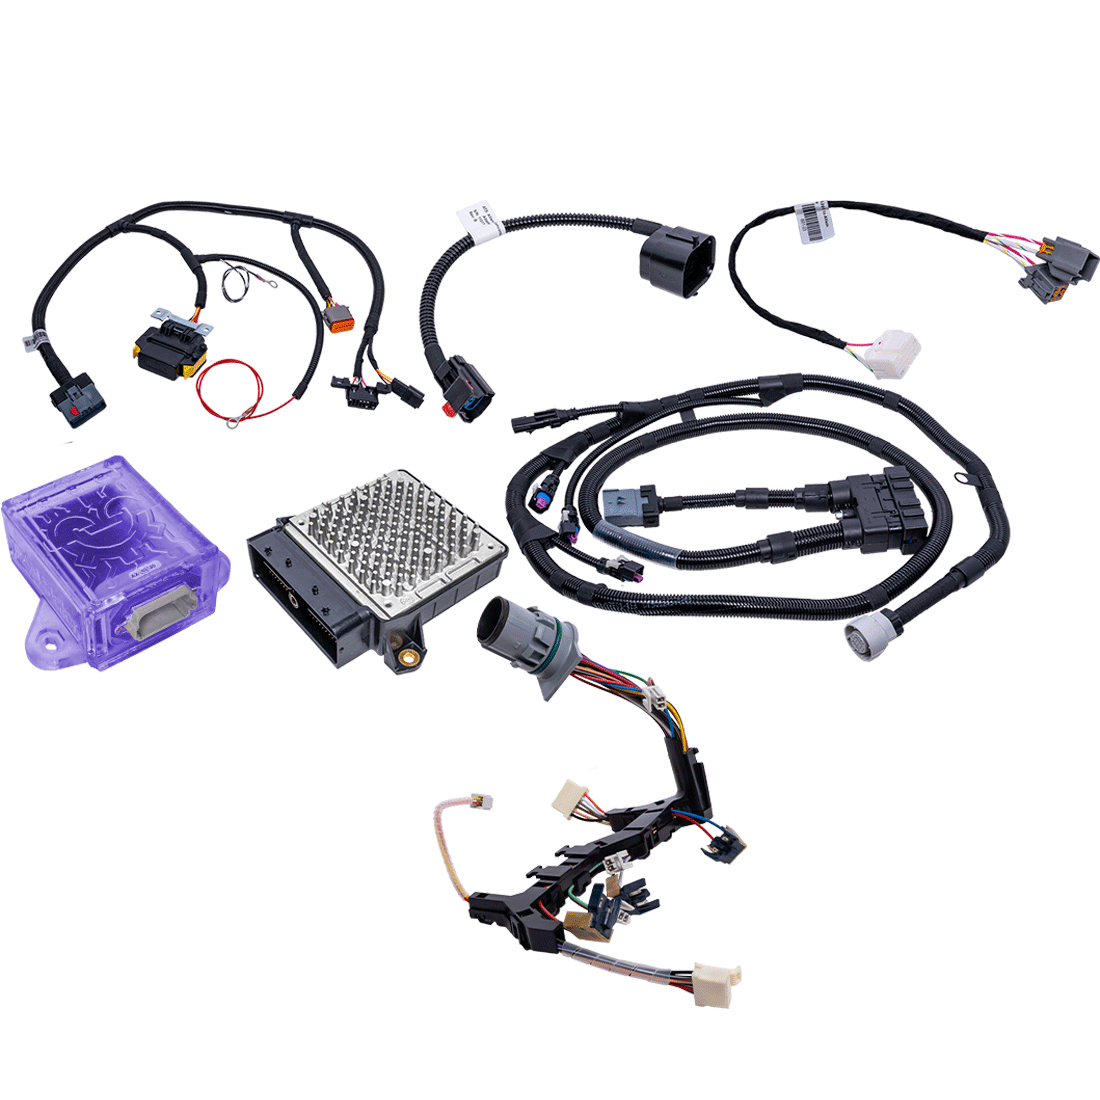 ATS 3190532356 Electronics Upgrade Kit Allison Conversion 68RFE 2010-2012 2011-2019 6 Speed Allison Used in Conversion